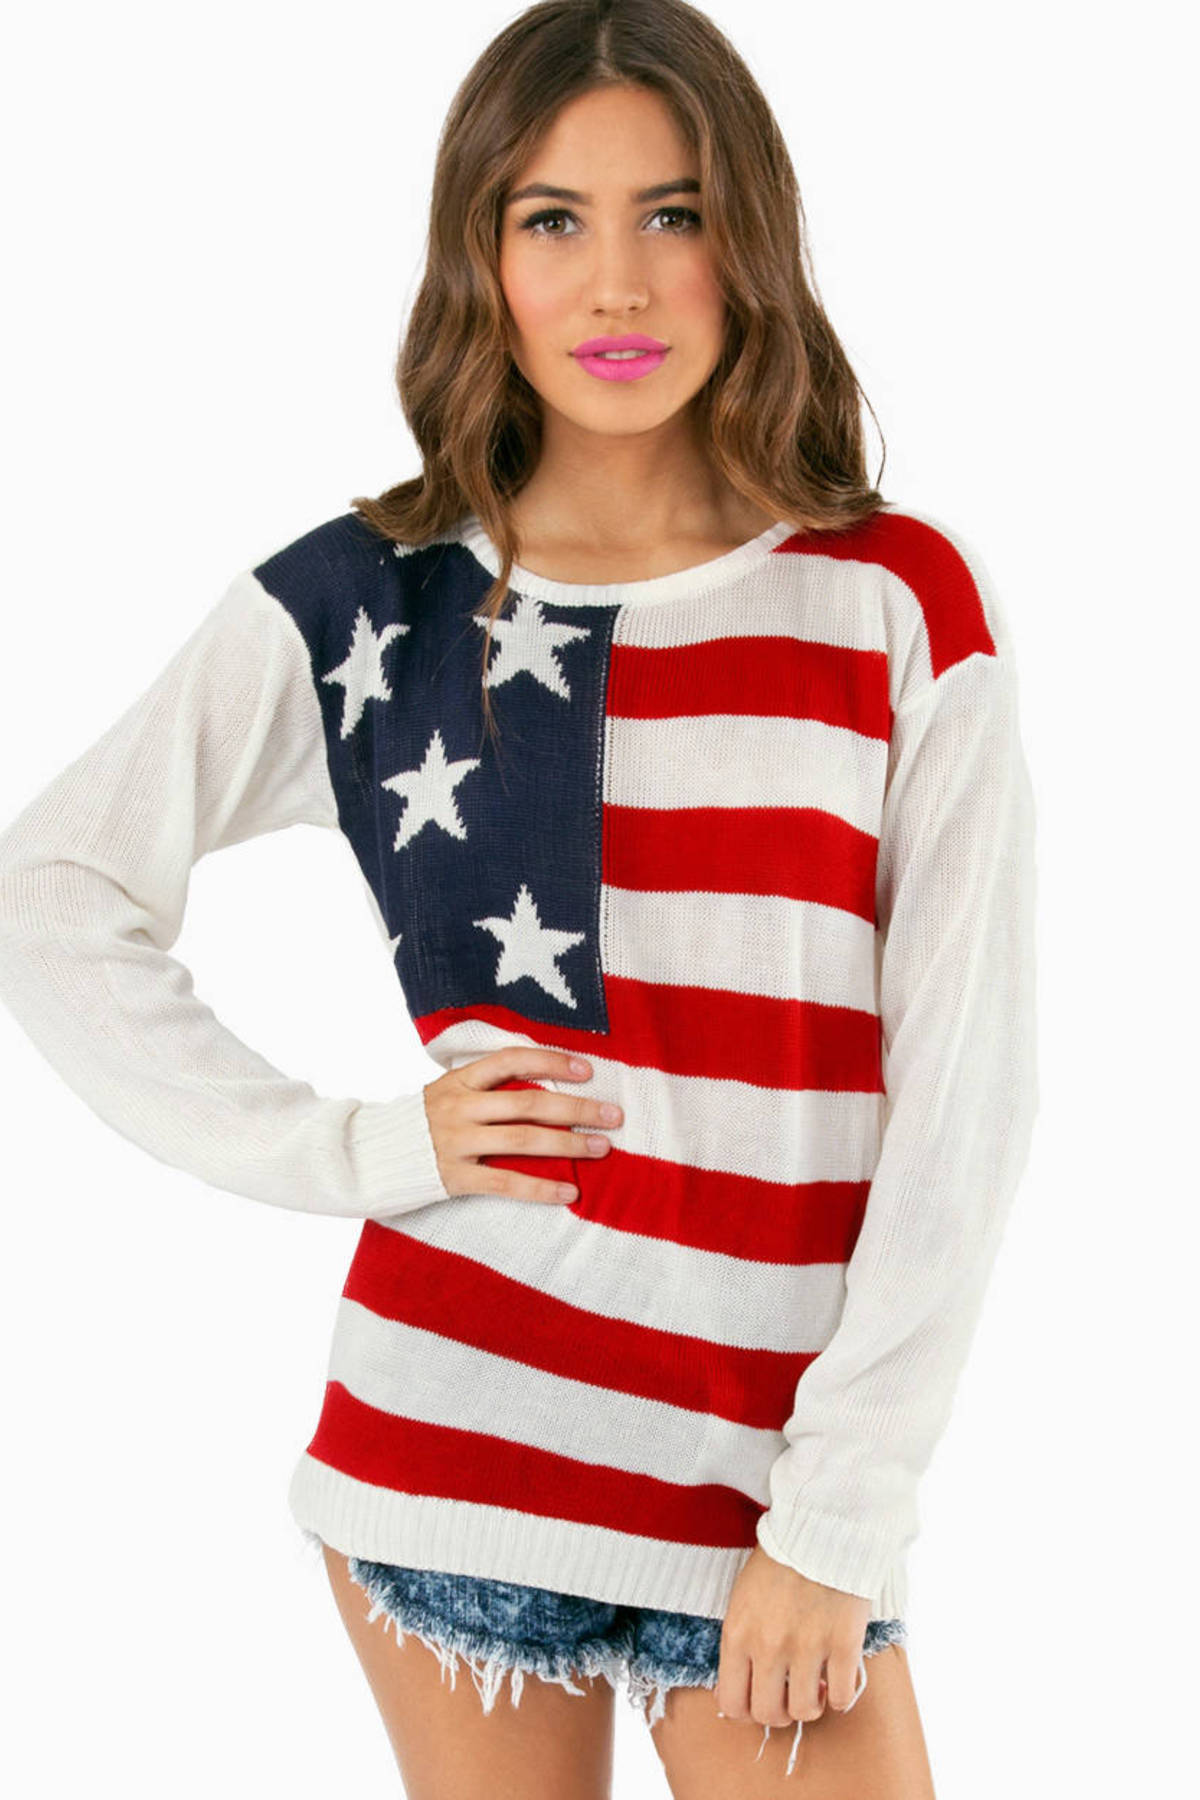 America For Me Knit Sweater in Red Multi - $50 | Tobi US